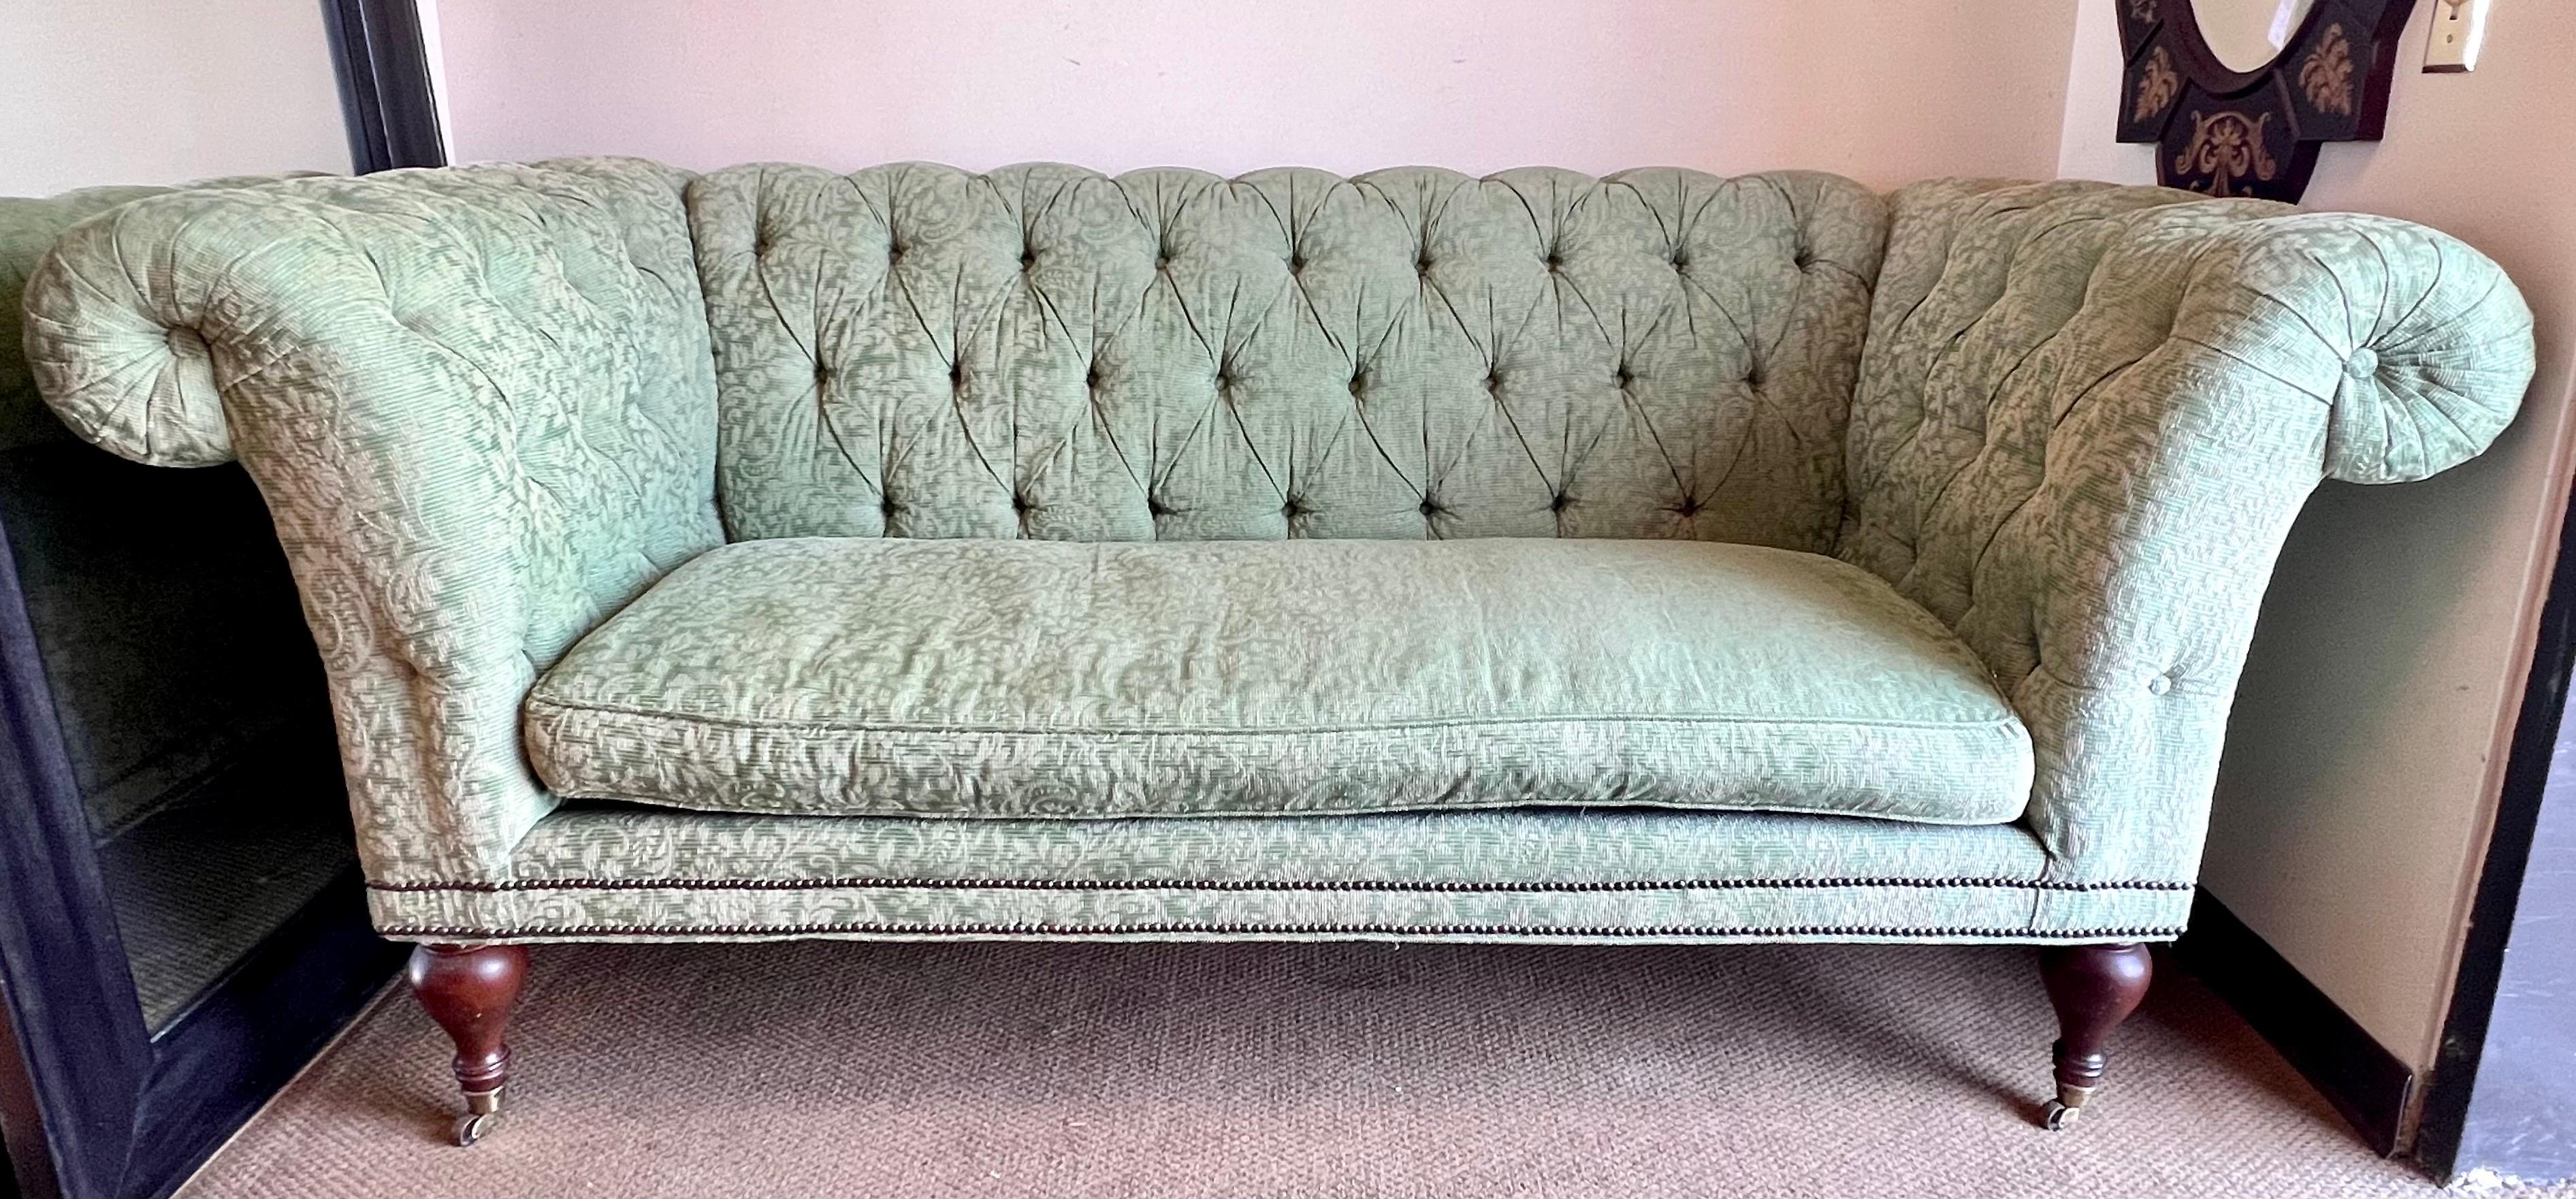 American Drexel Tufted Scroll Arm Chesterfield Sofa for Lillian August